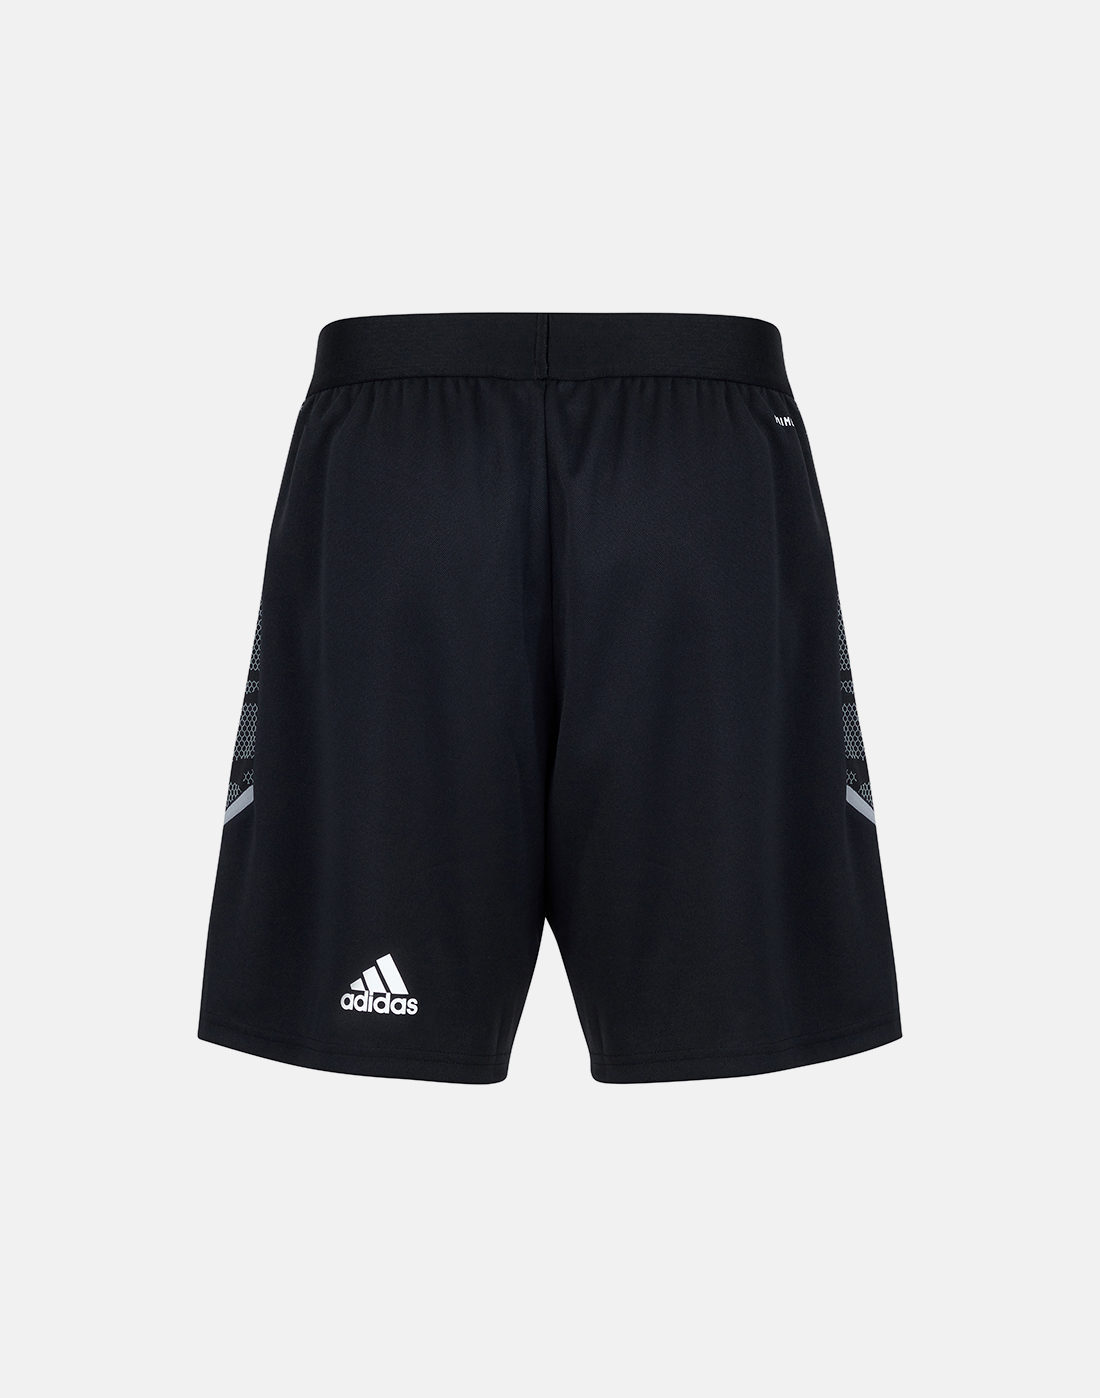 adidas Adult Munster Gym Shorts - Black | Life Style Sports IE